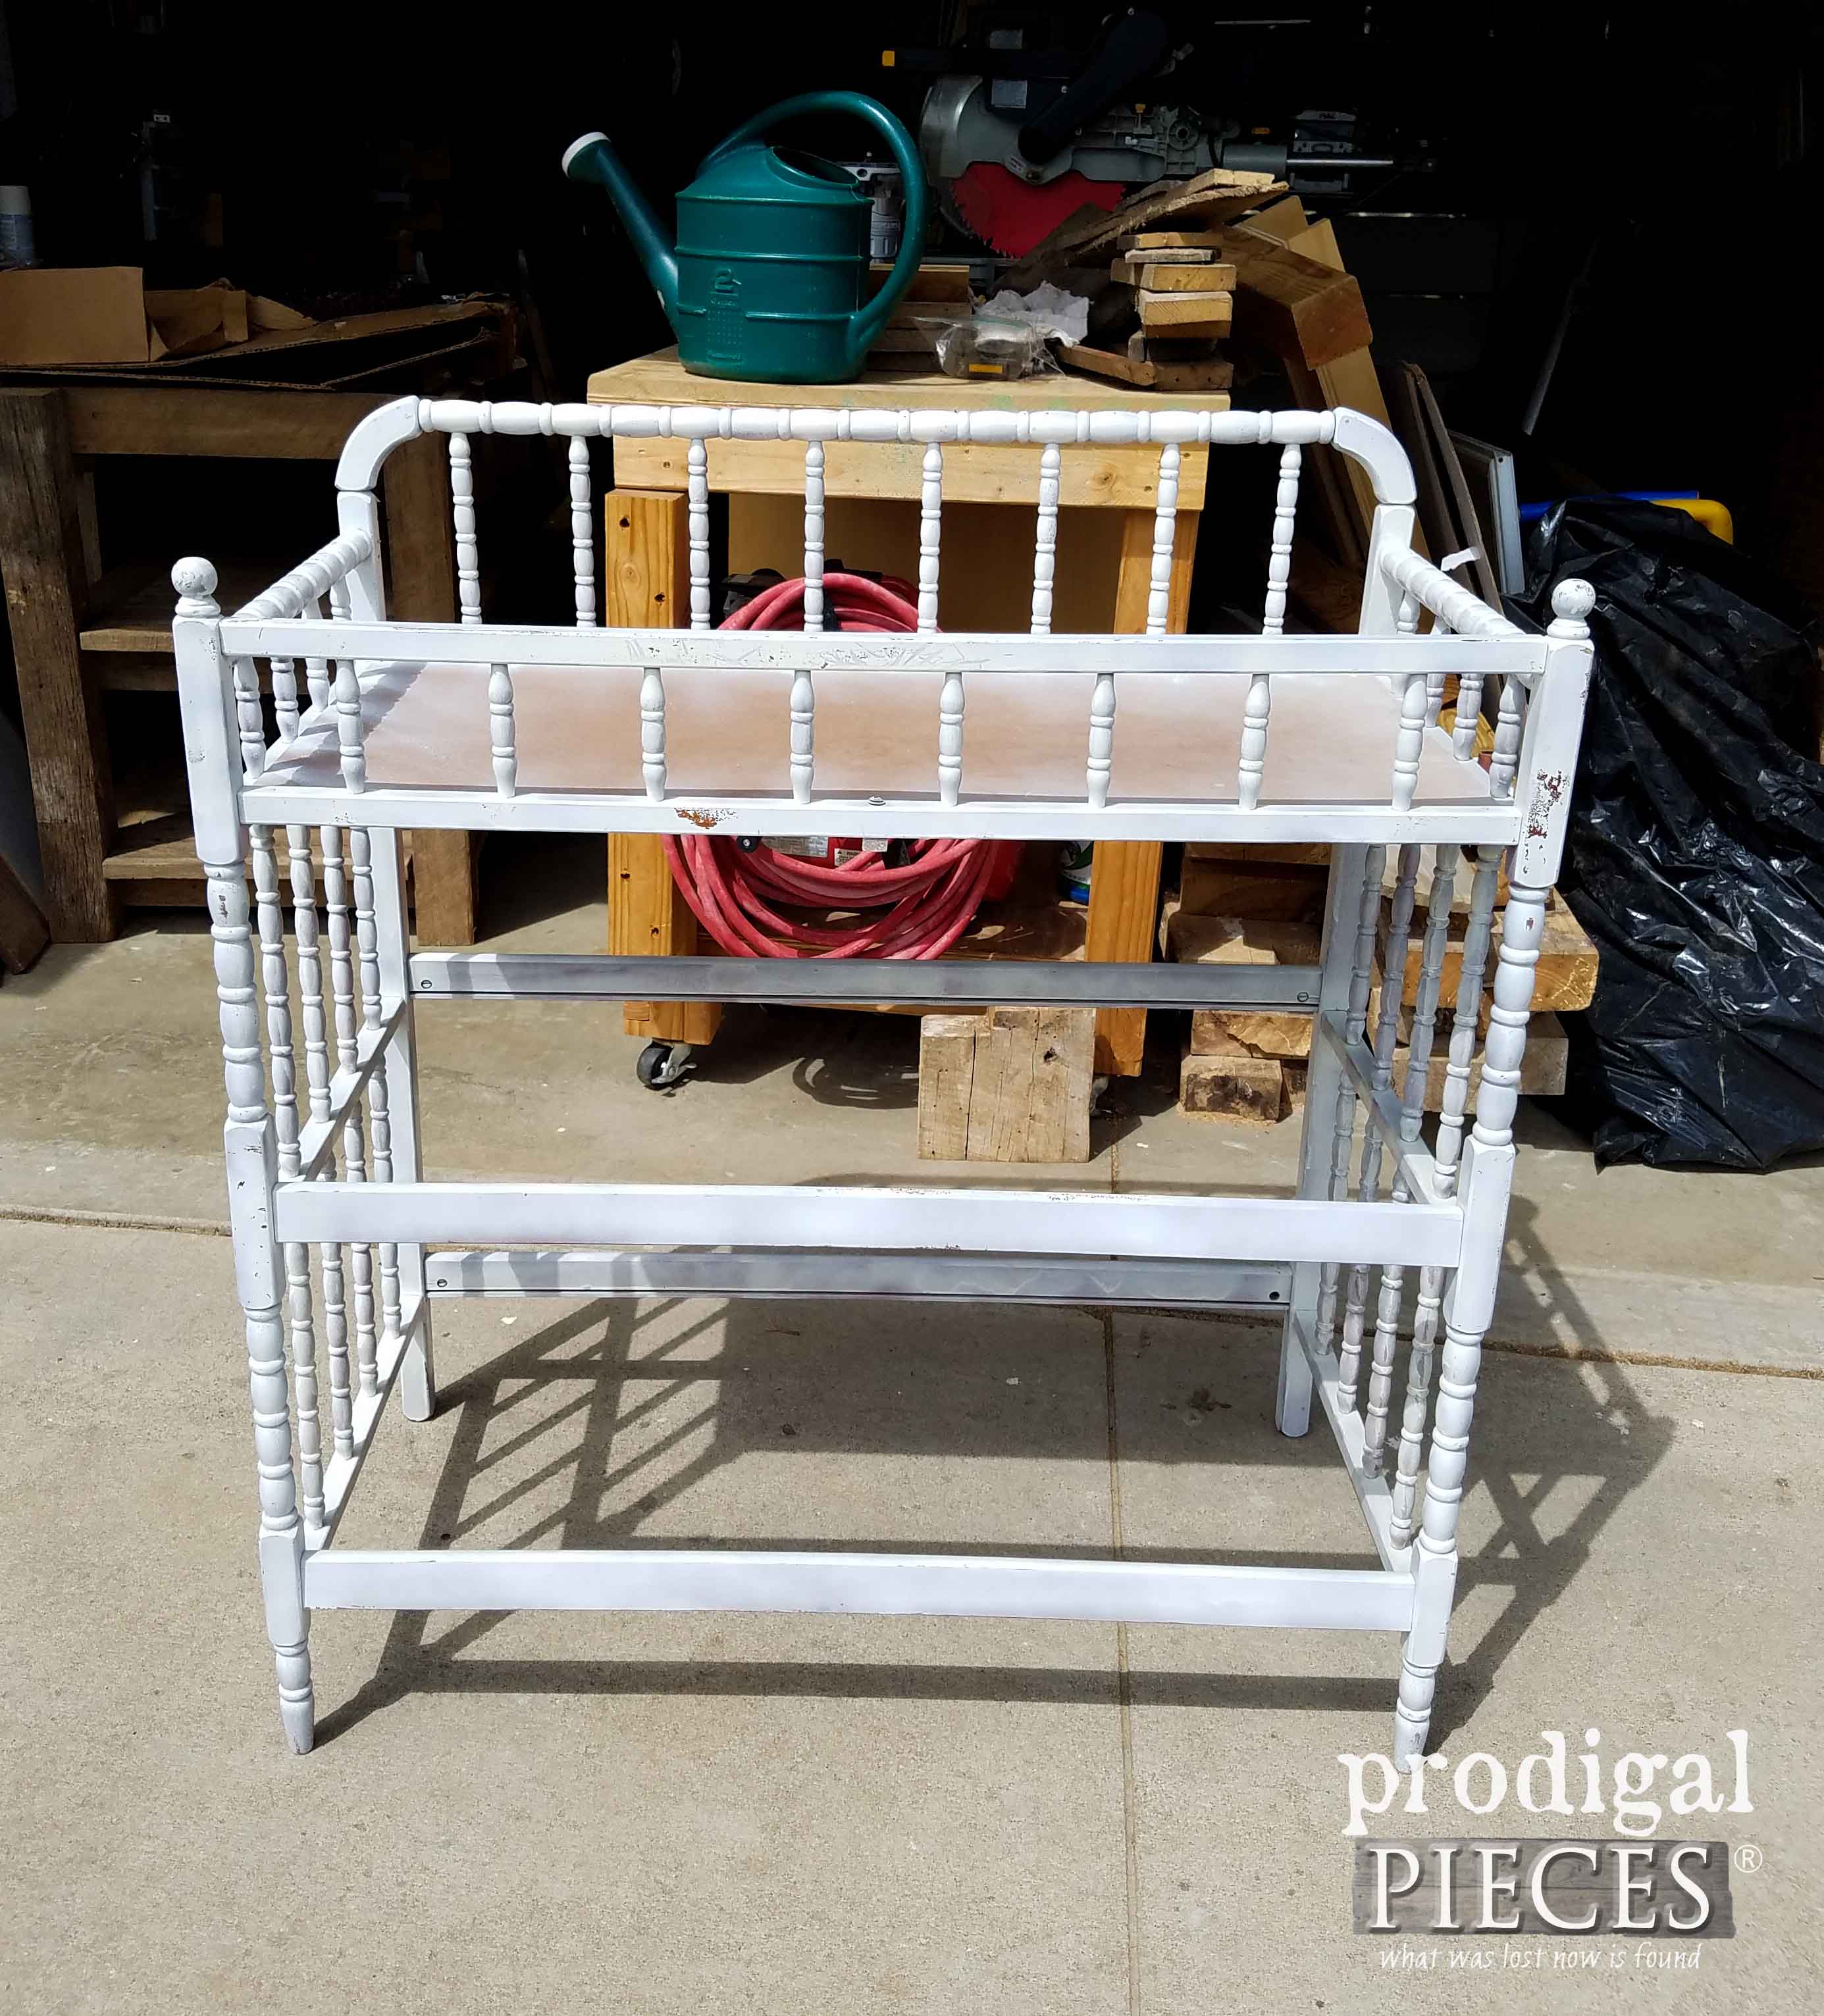 Vintage Changing Table Found Curbside | Prodigal Pieces | prodigalpieces.com